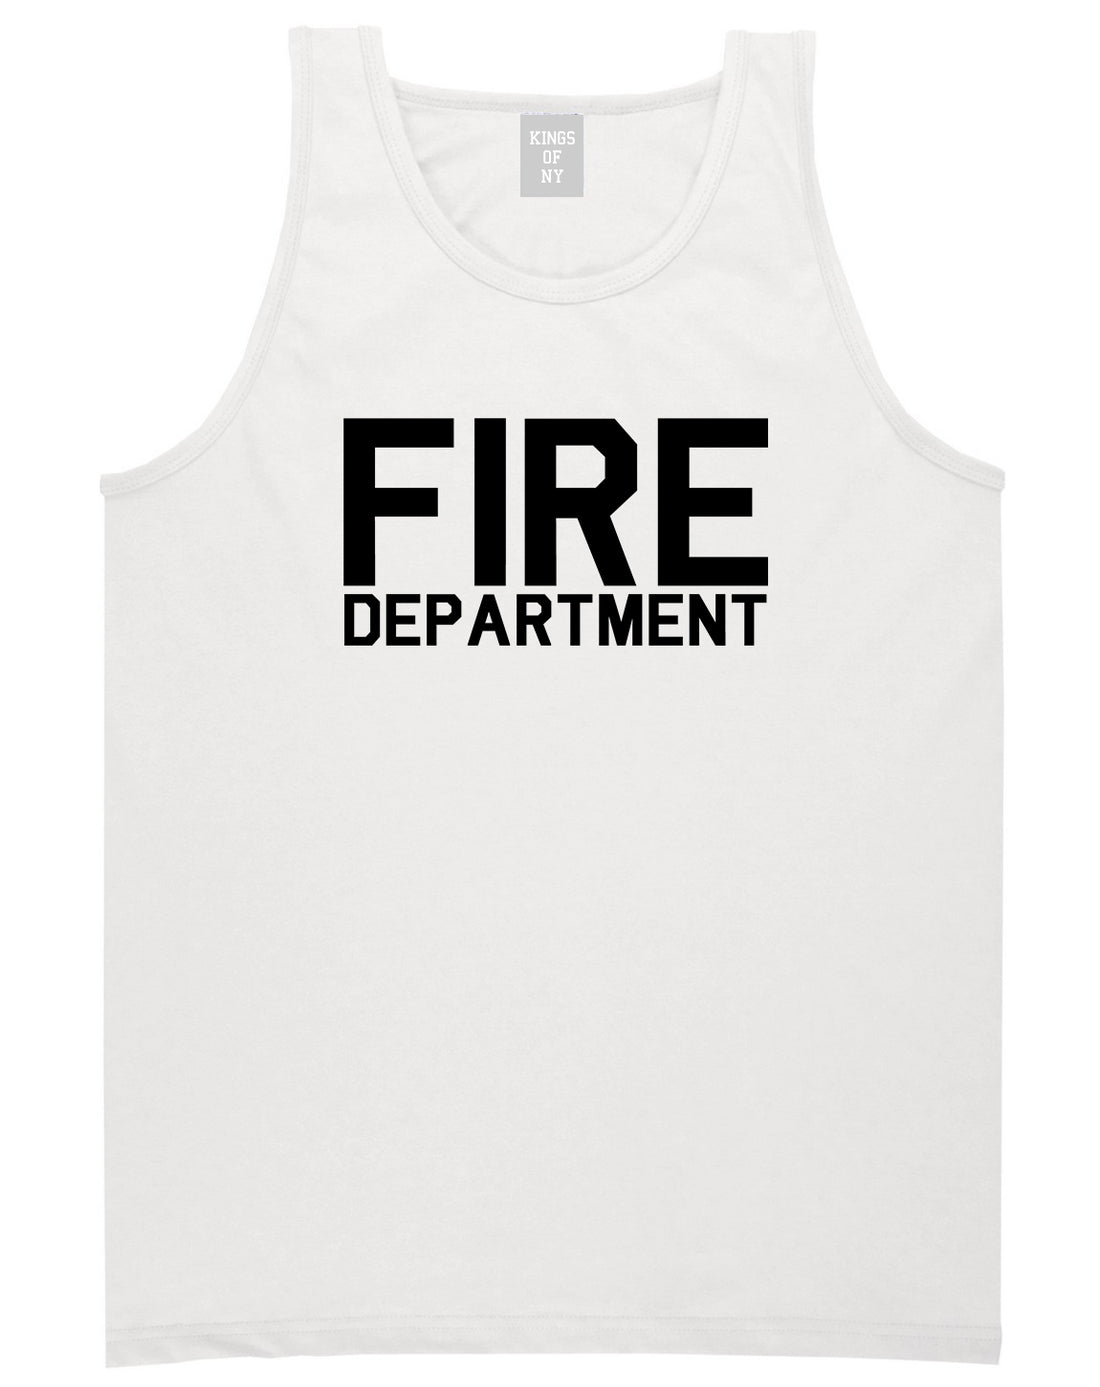 Fire Department Dept Mens White Tank Top Shirt by KINGS OF NY